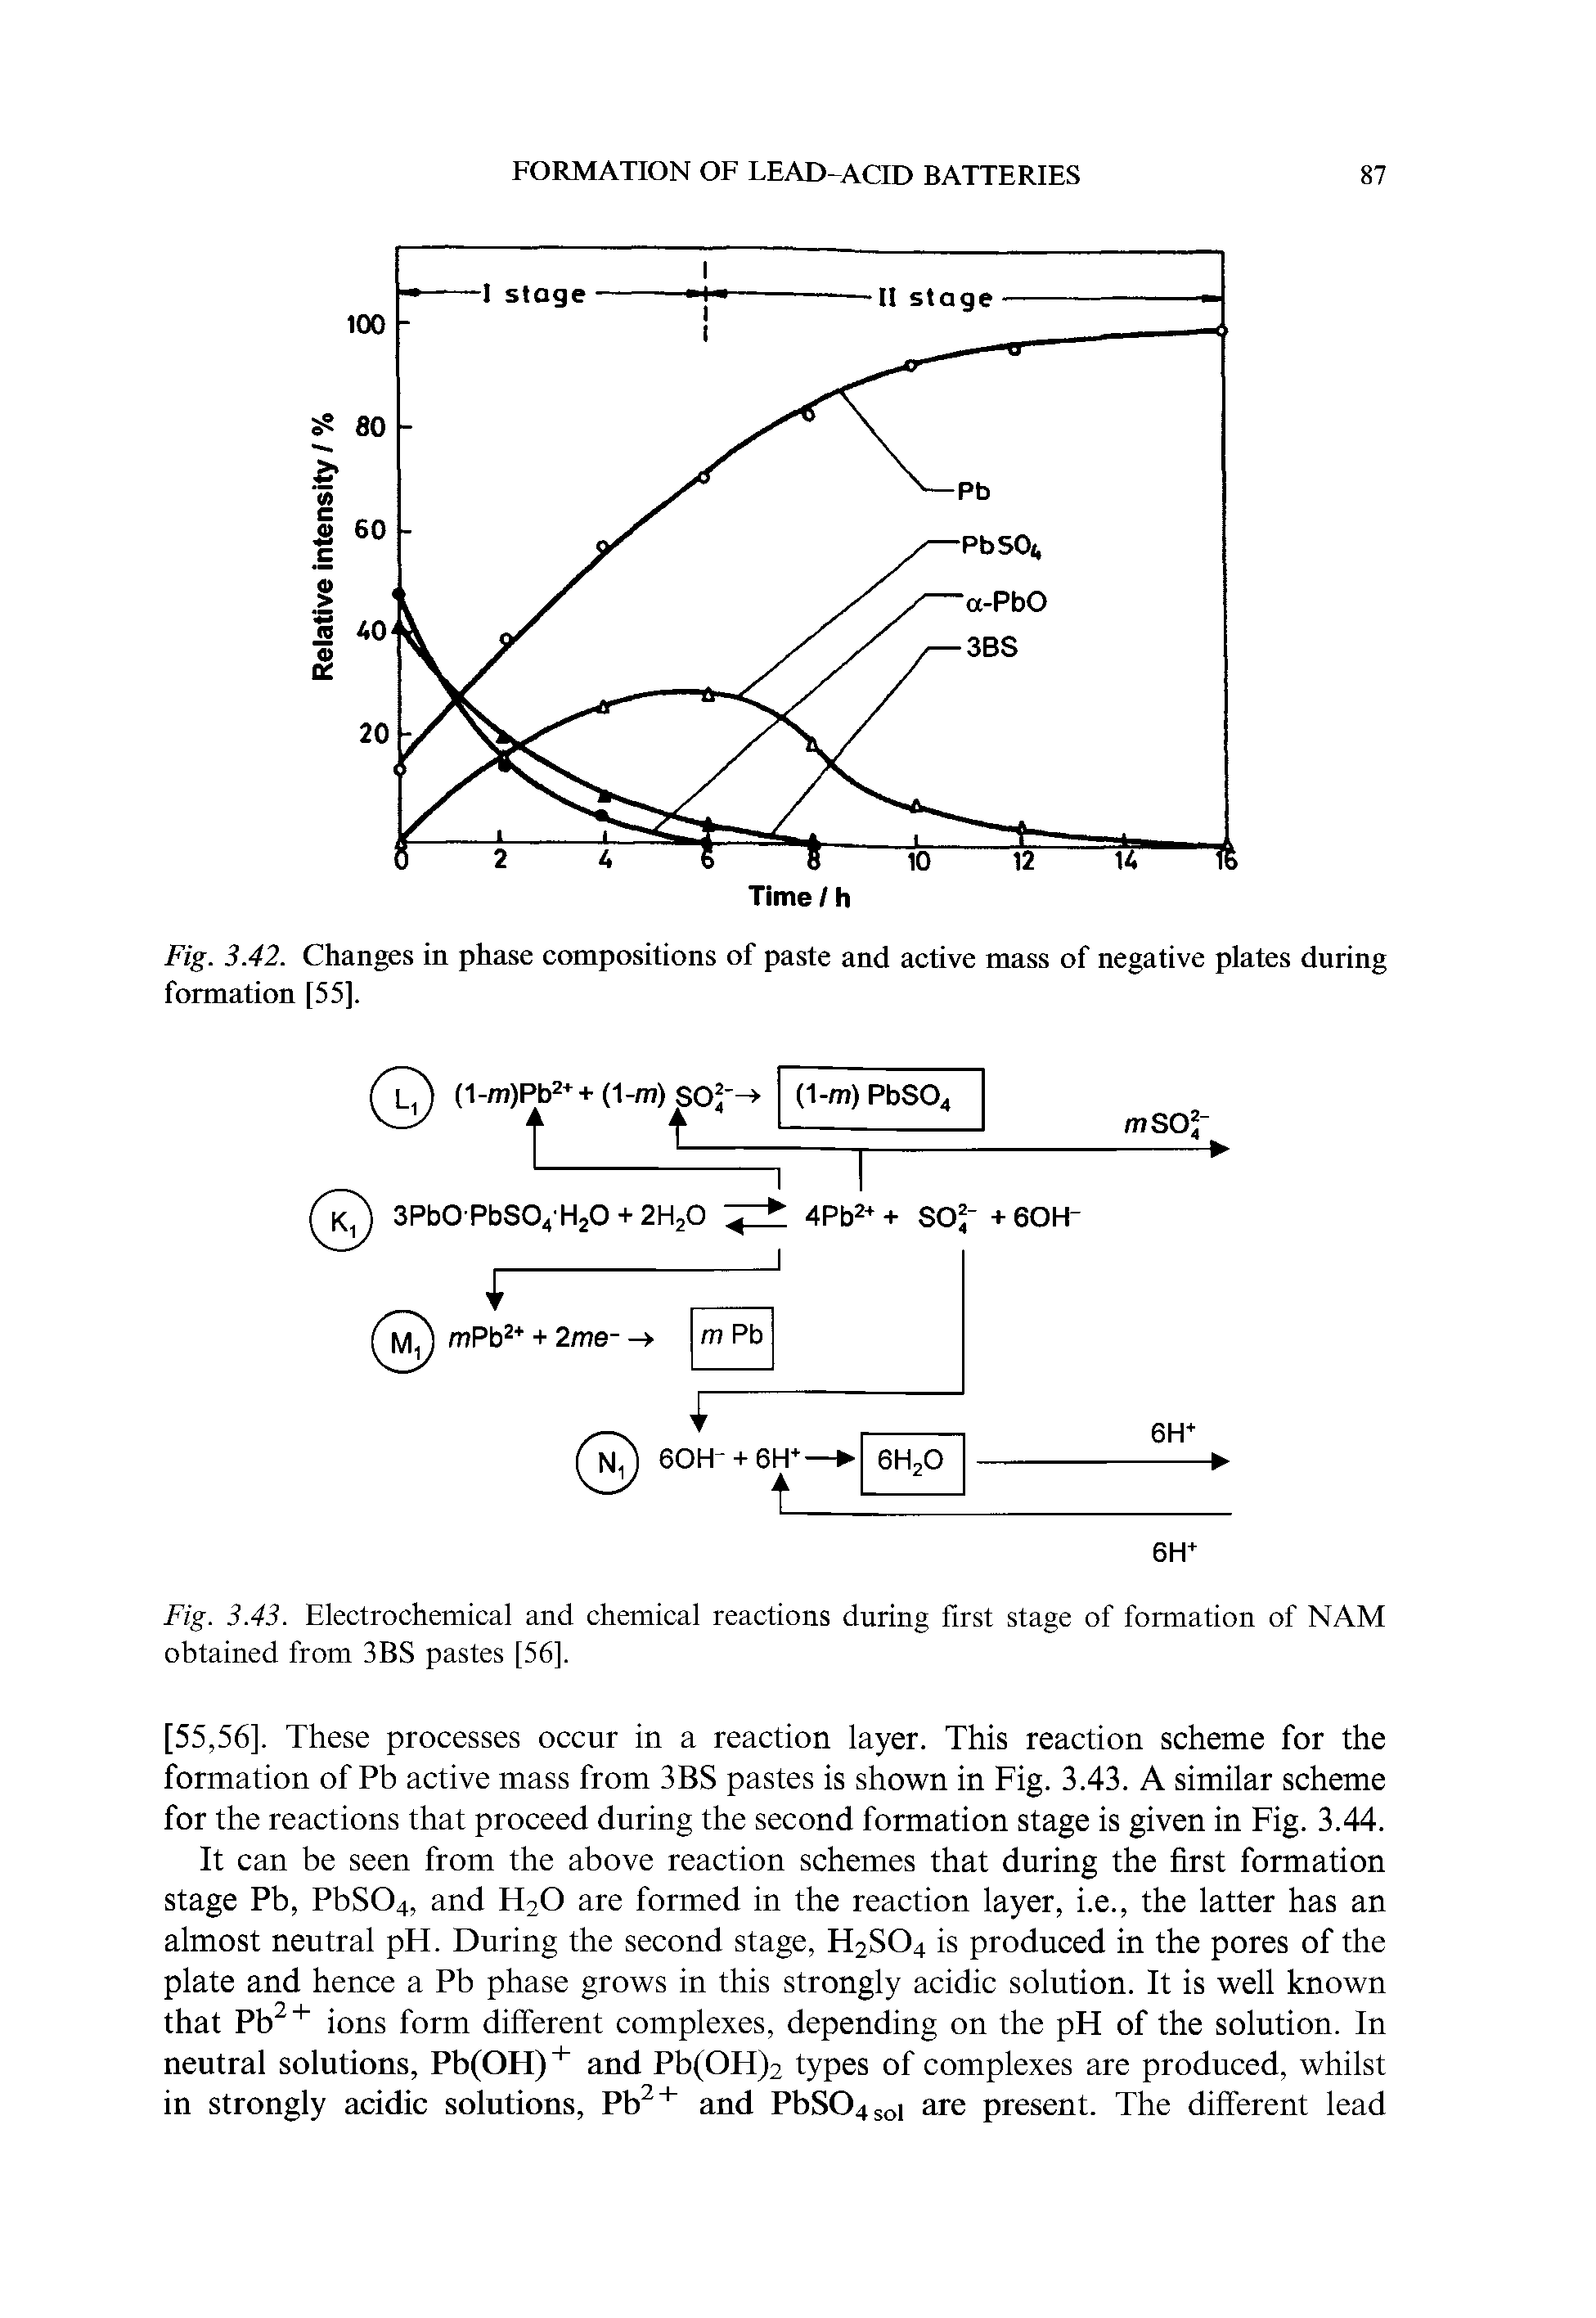 Fig. 3.43. Electrochemical and chemical reactions during first stage of formation of NAM obtained from 3BS pastes [56].